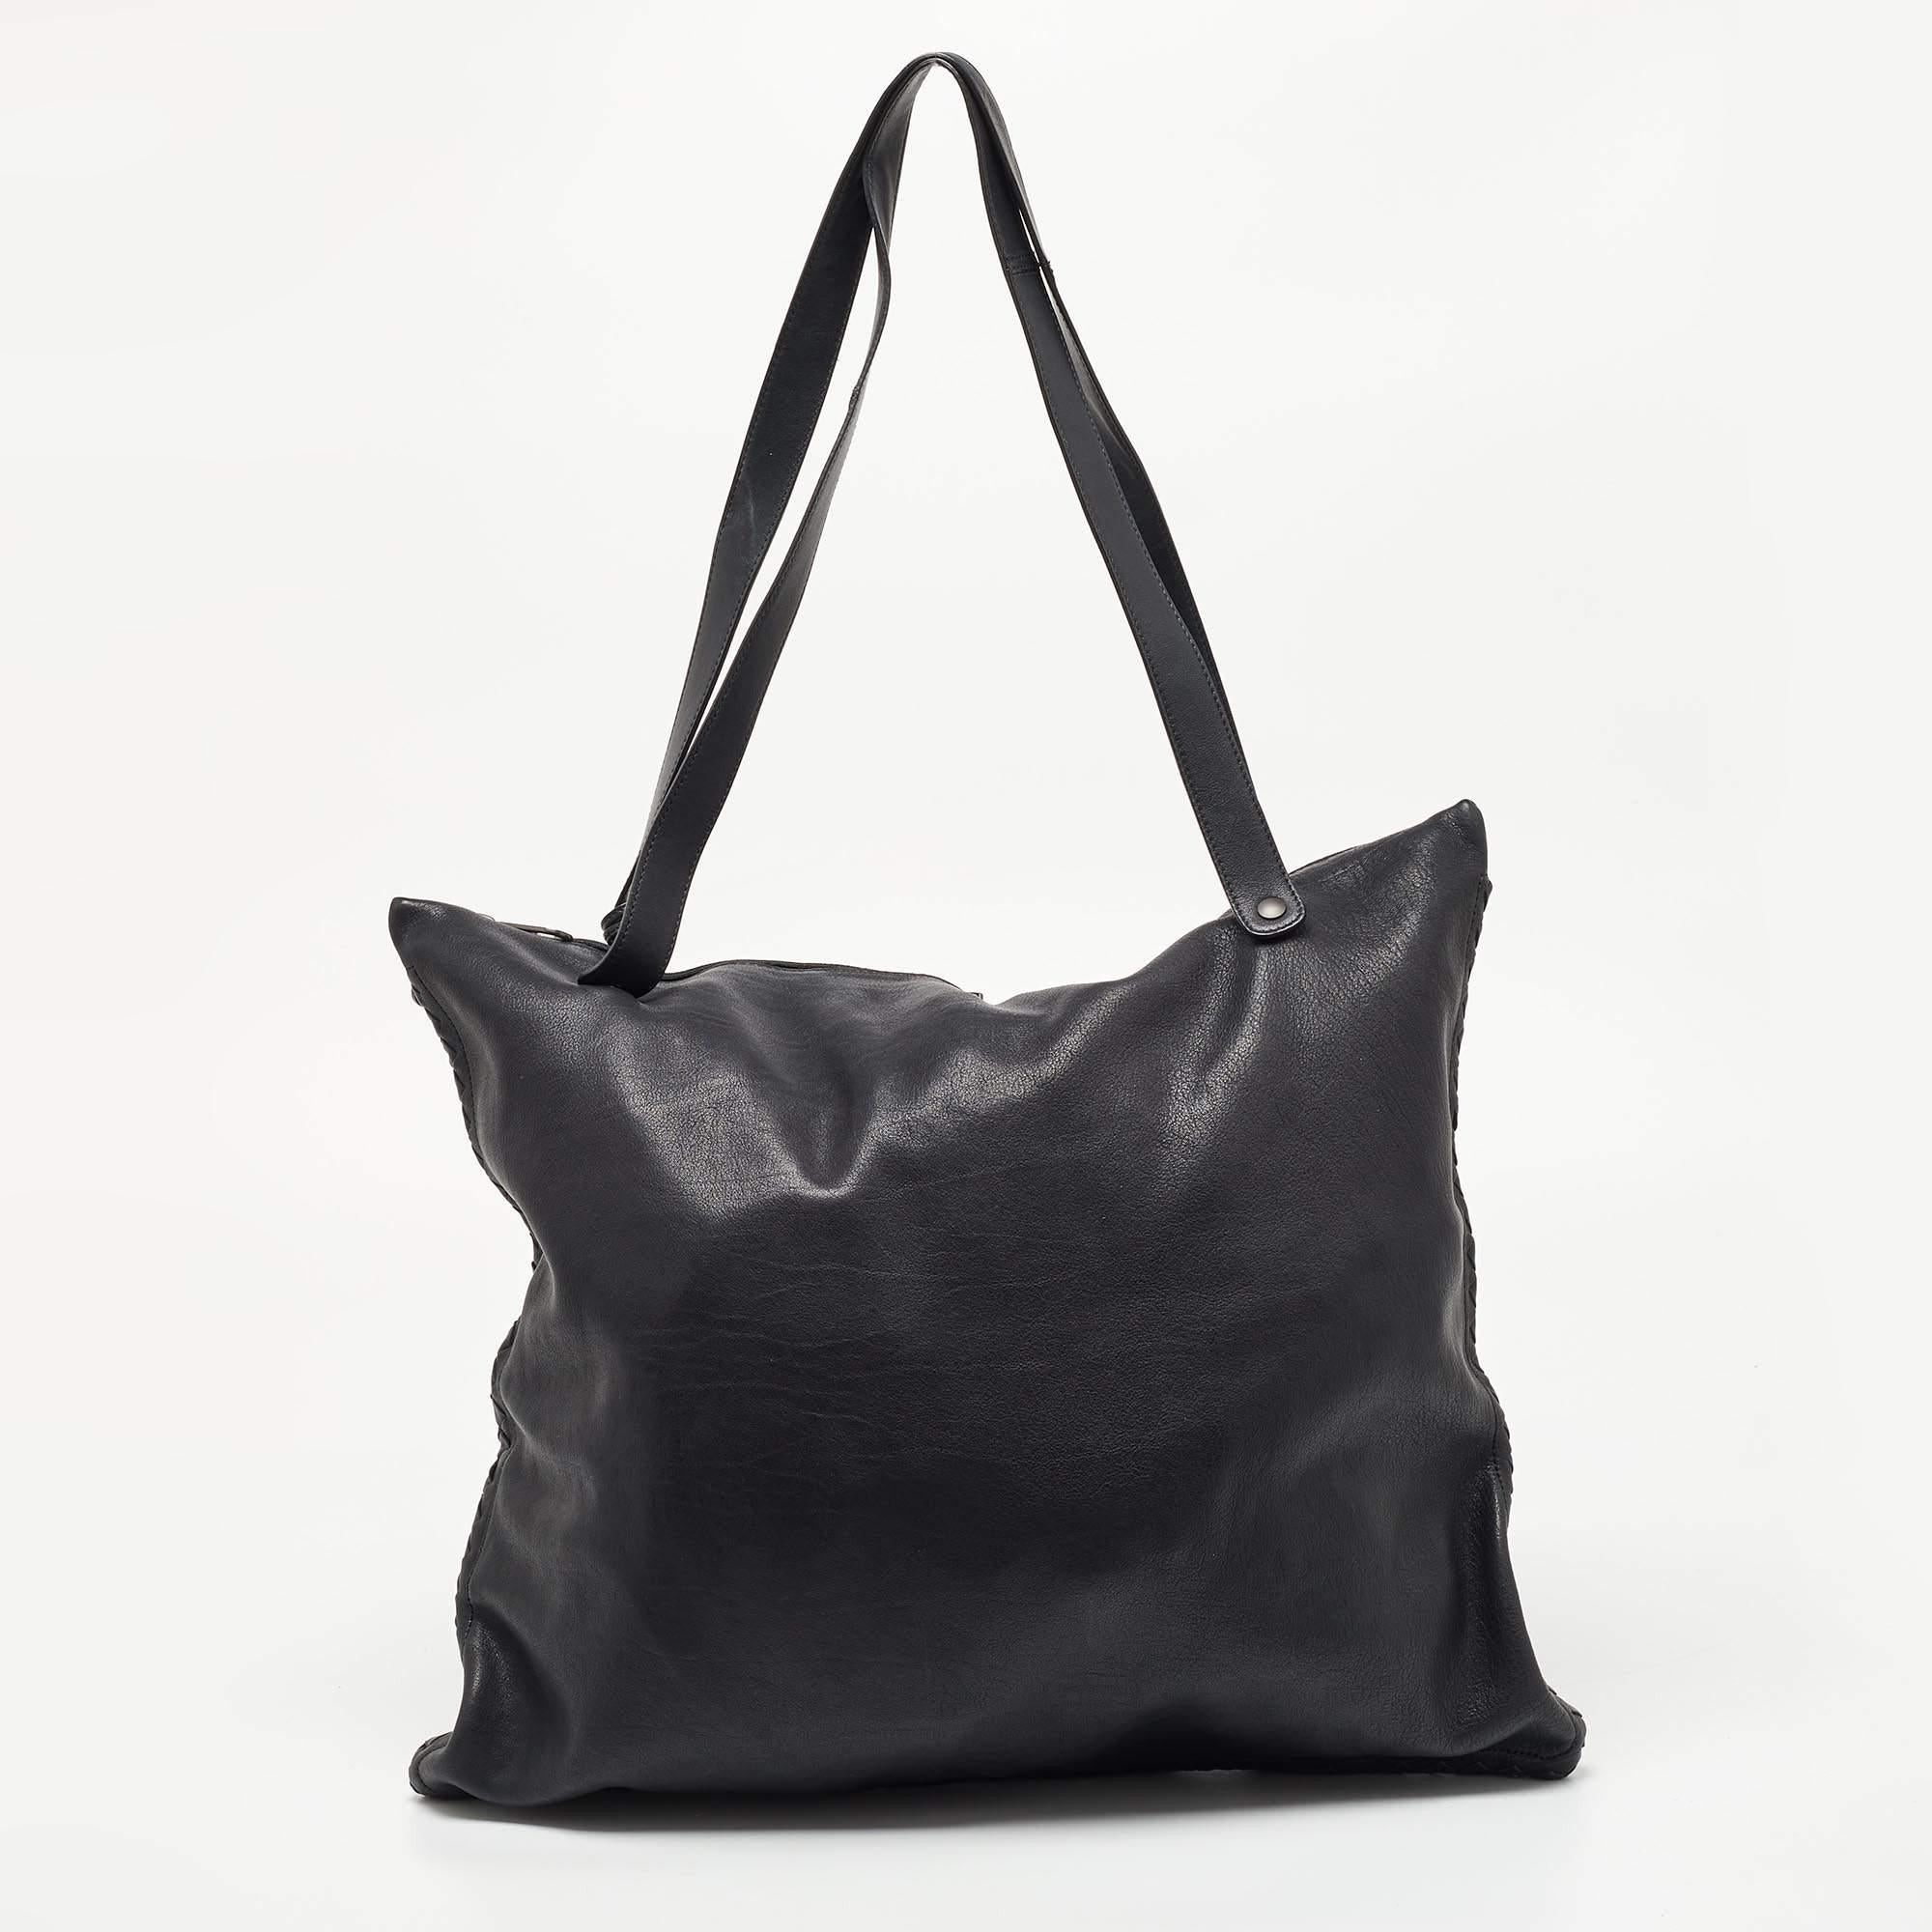 This alluring tote bag for women has been designed to assist you on any day. Convenient to carry and fashionably designed, the tote is cut with skill and sewn into a great shape. It is well-equipped to be a reliable accessory.

Includes: Key